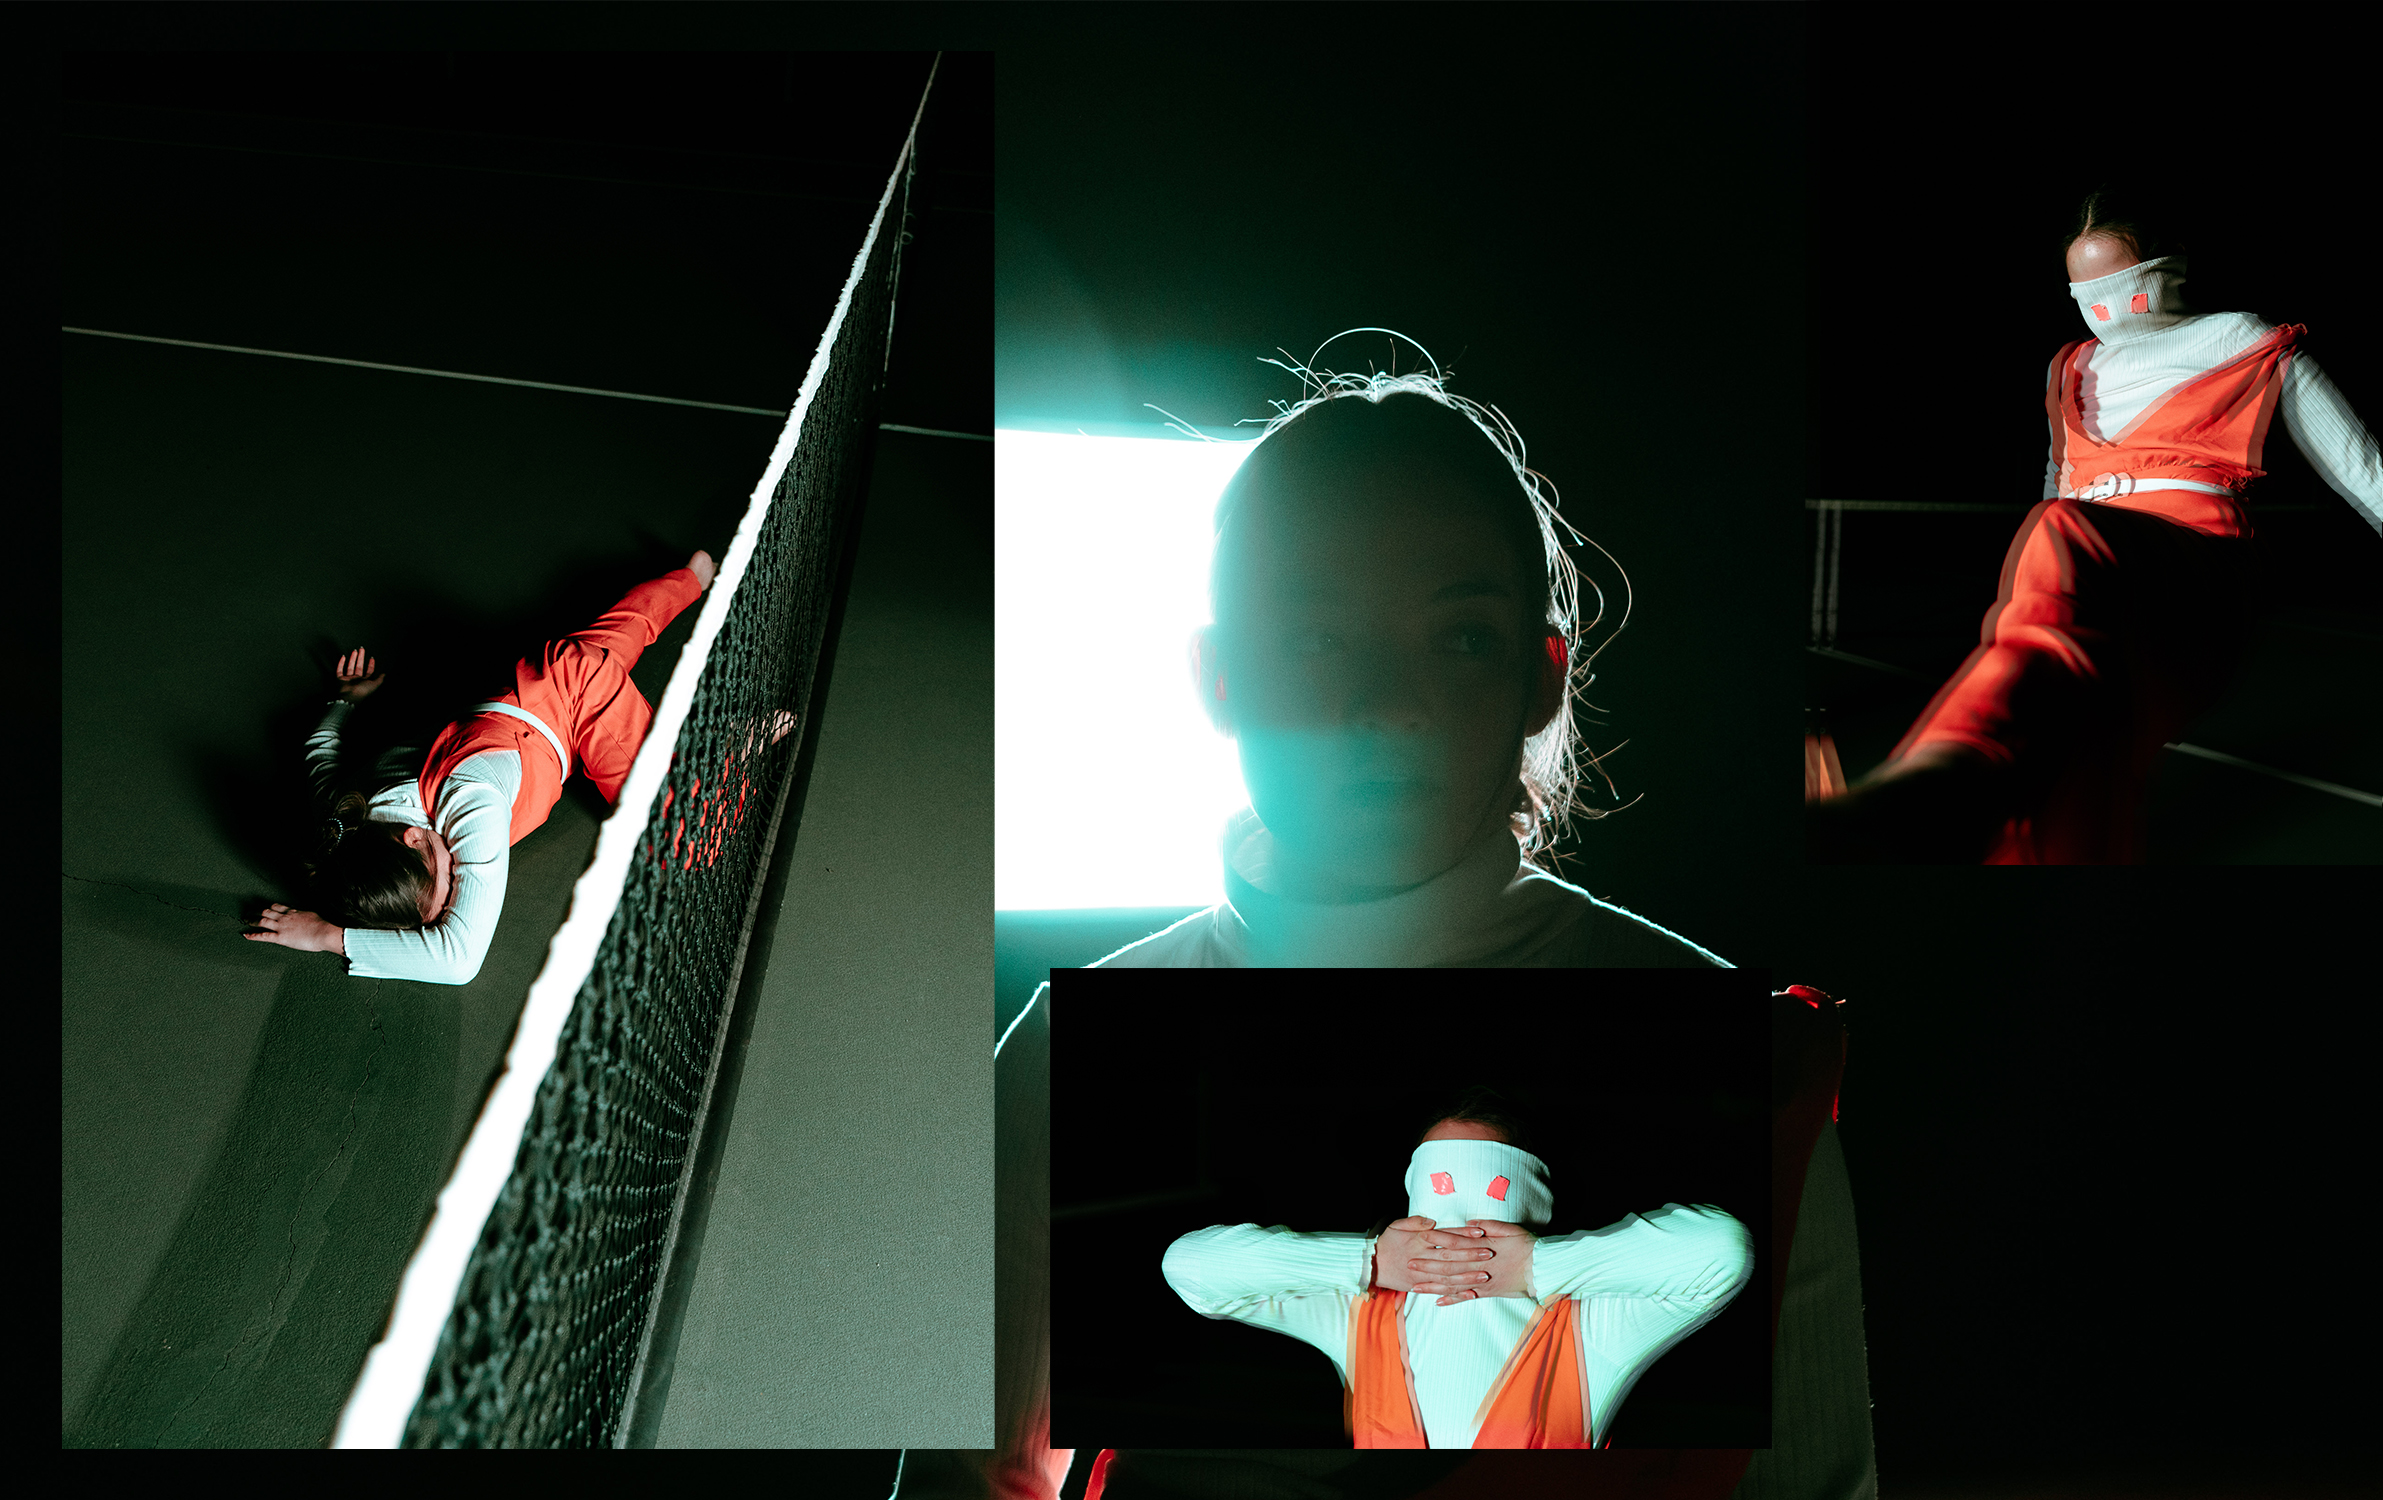 A photo collage of a person in red and white at a tennis course during the night. They are in different dynamic poses. 